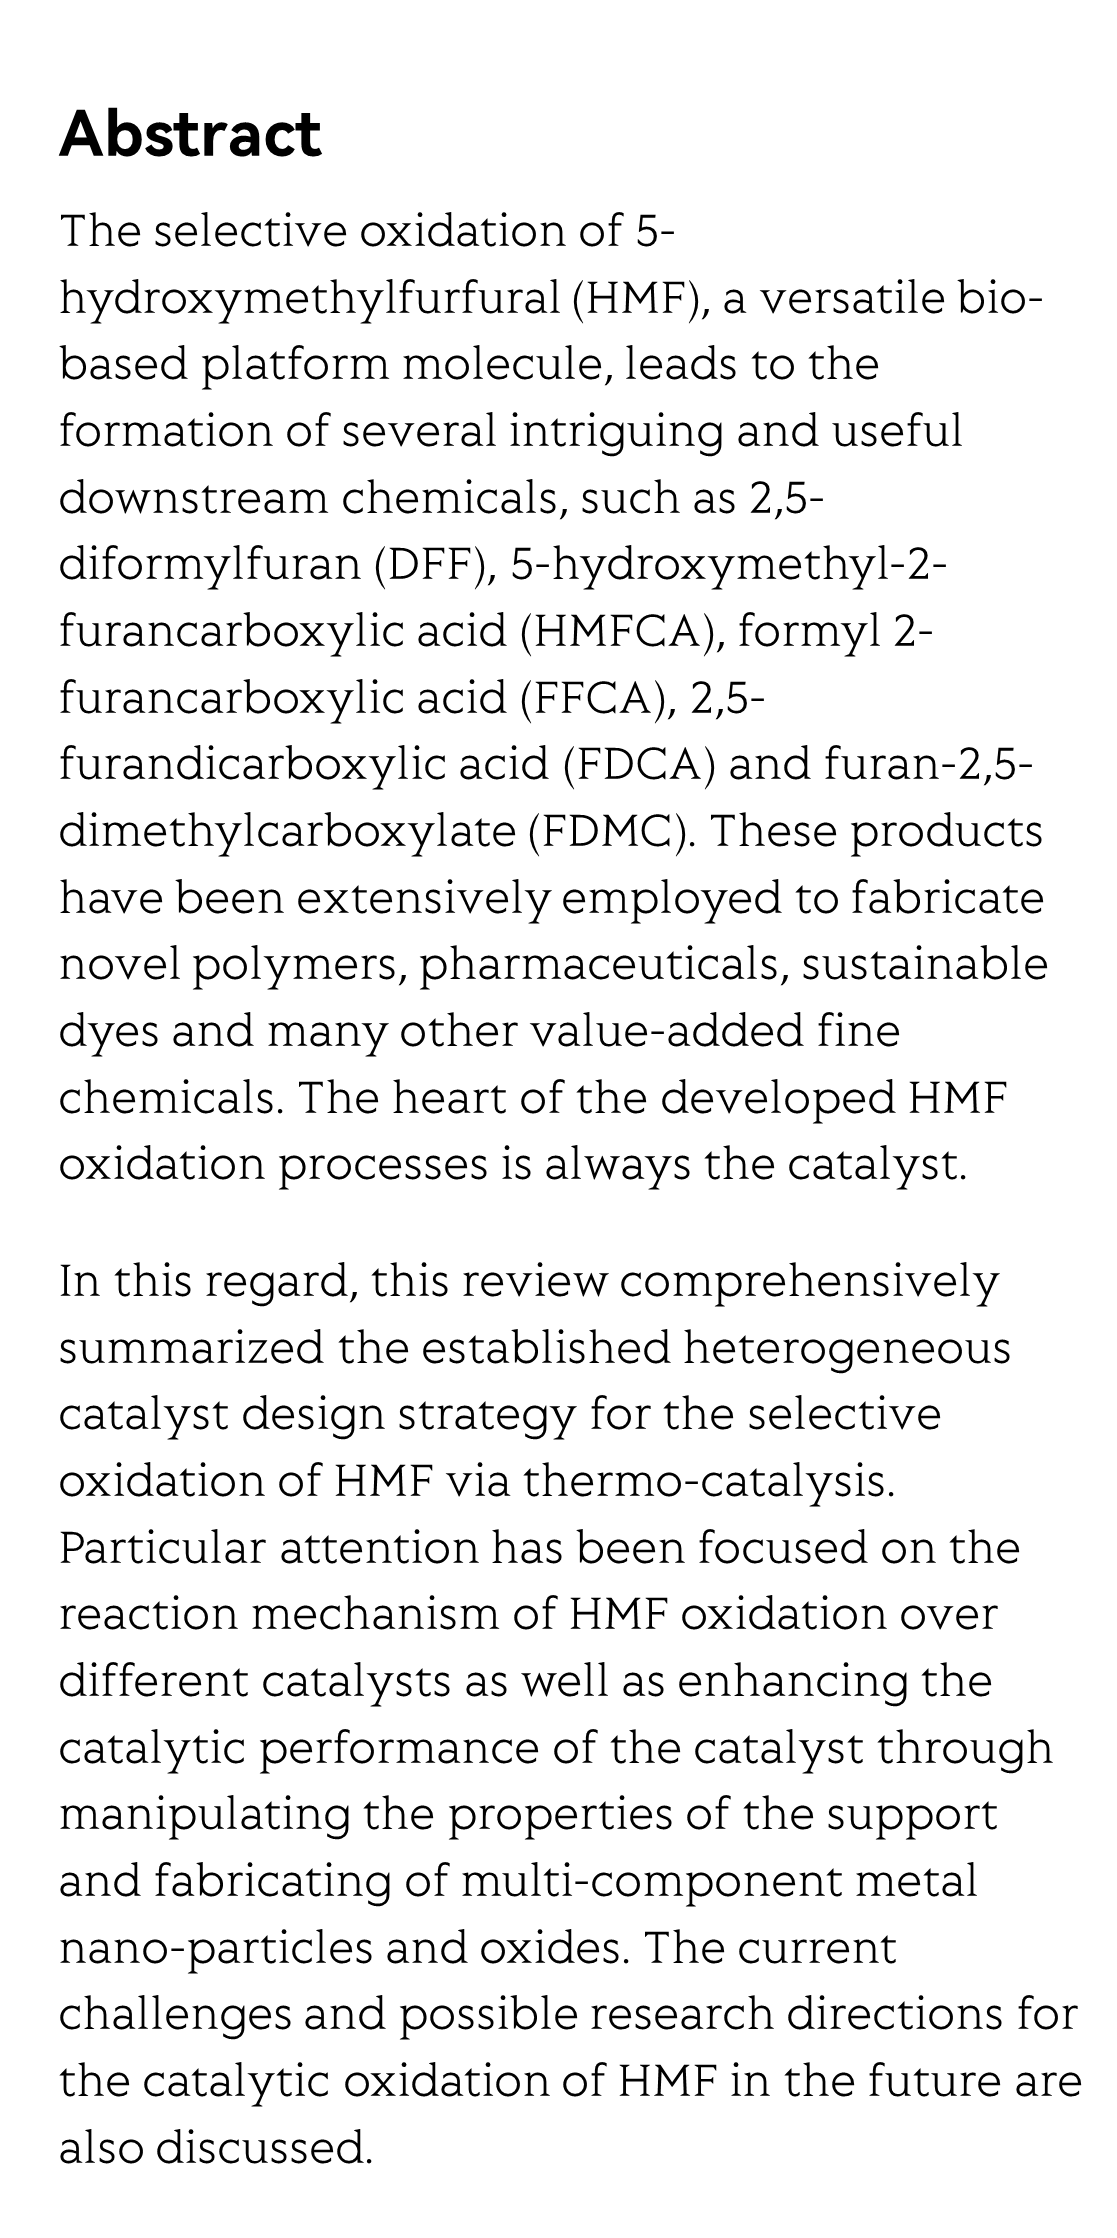 Catalyst design strategy toward the efficient heterogeneously-catalyzed selective oxidation of 5-hydroxymethylfurfural_2